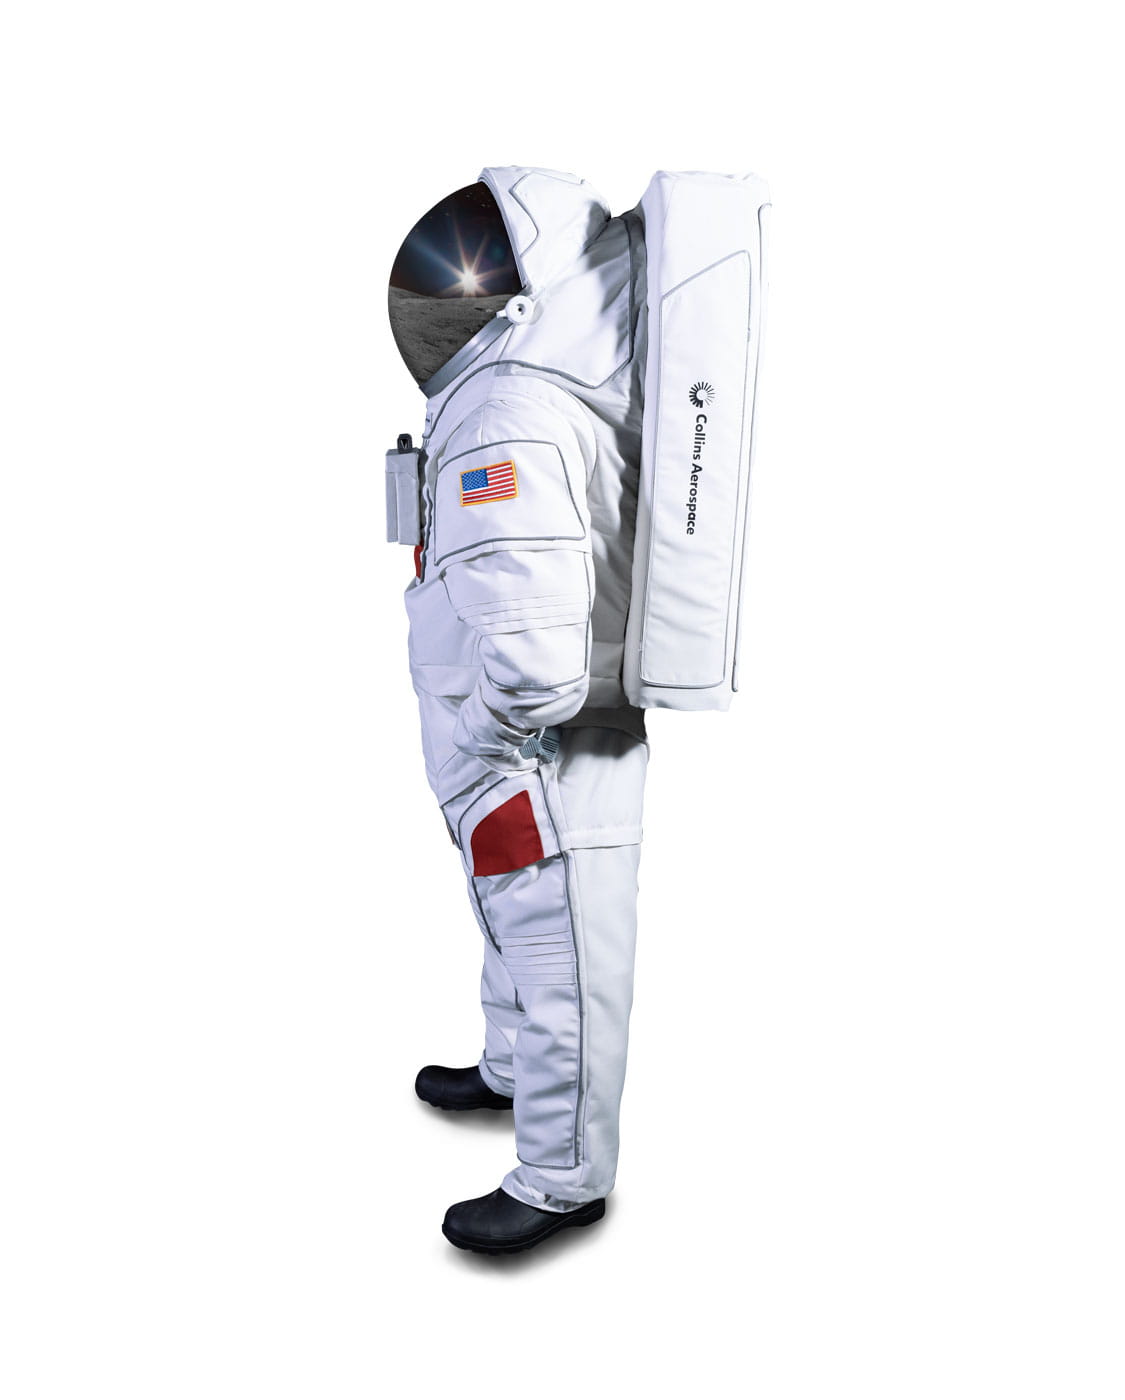 View of the left side of the next generation space suit